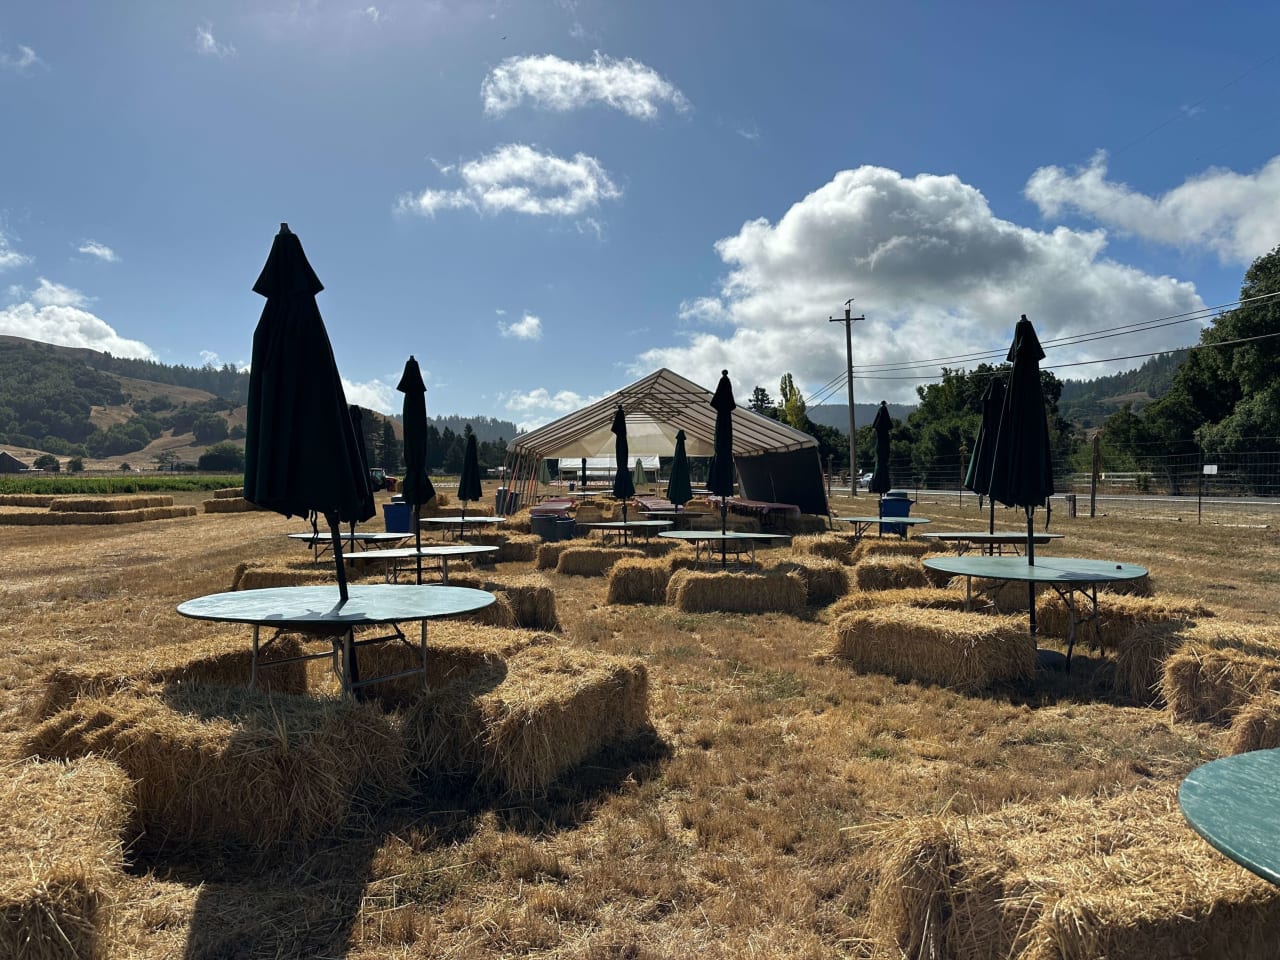 Celebrate Fall in Marin County with a Visit to Nicasio Valley Pumpkin Patch